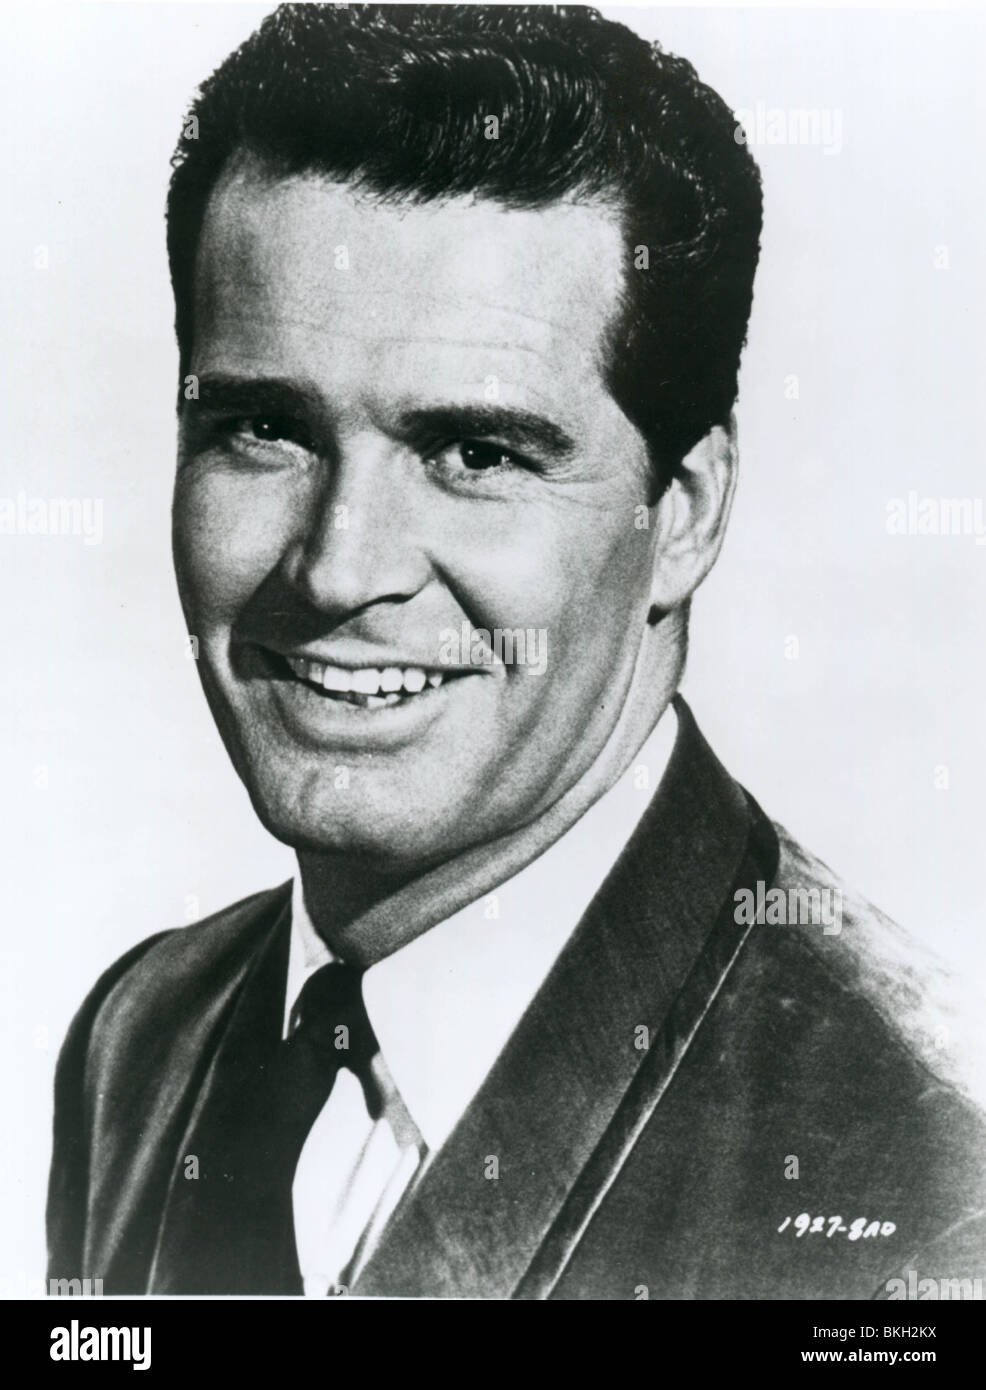 THE THRILL OF IT ALL (1963) JAMES GARNER THAL 003P Stock Photo - Alamy